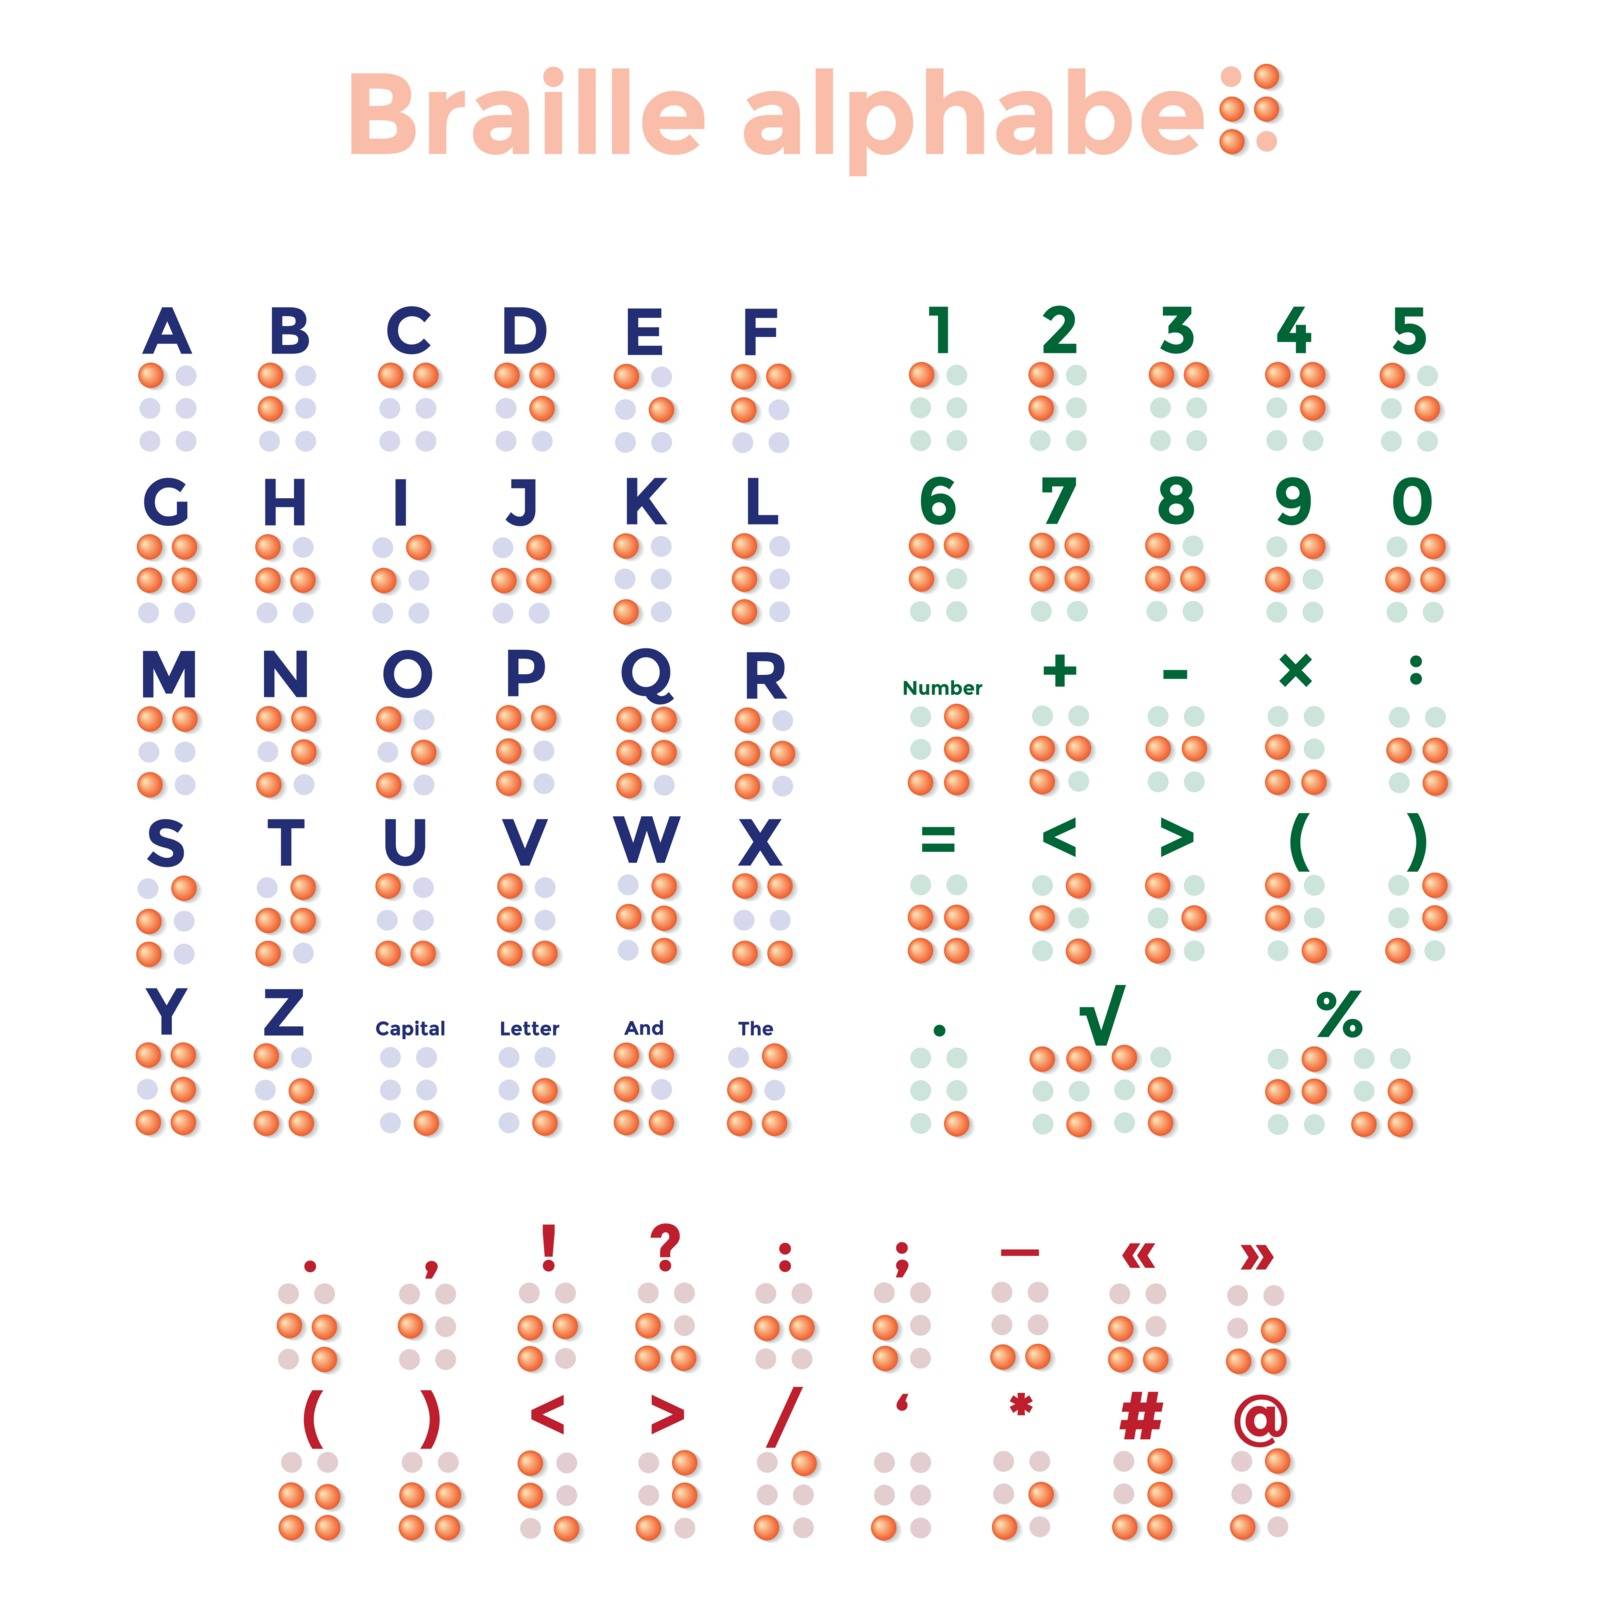 Braille Alphabet, Punctuation and Numbers by CrisPersonally